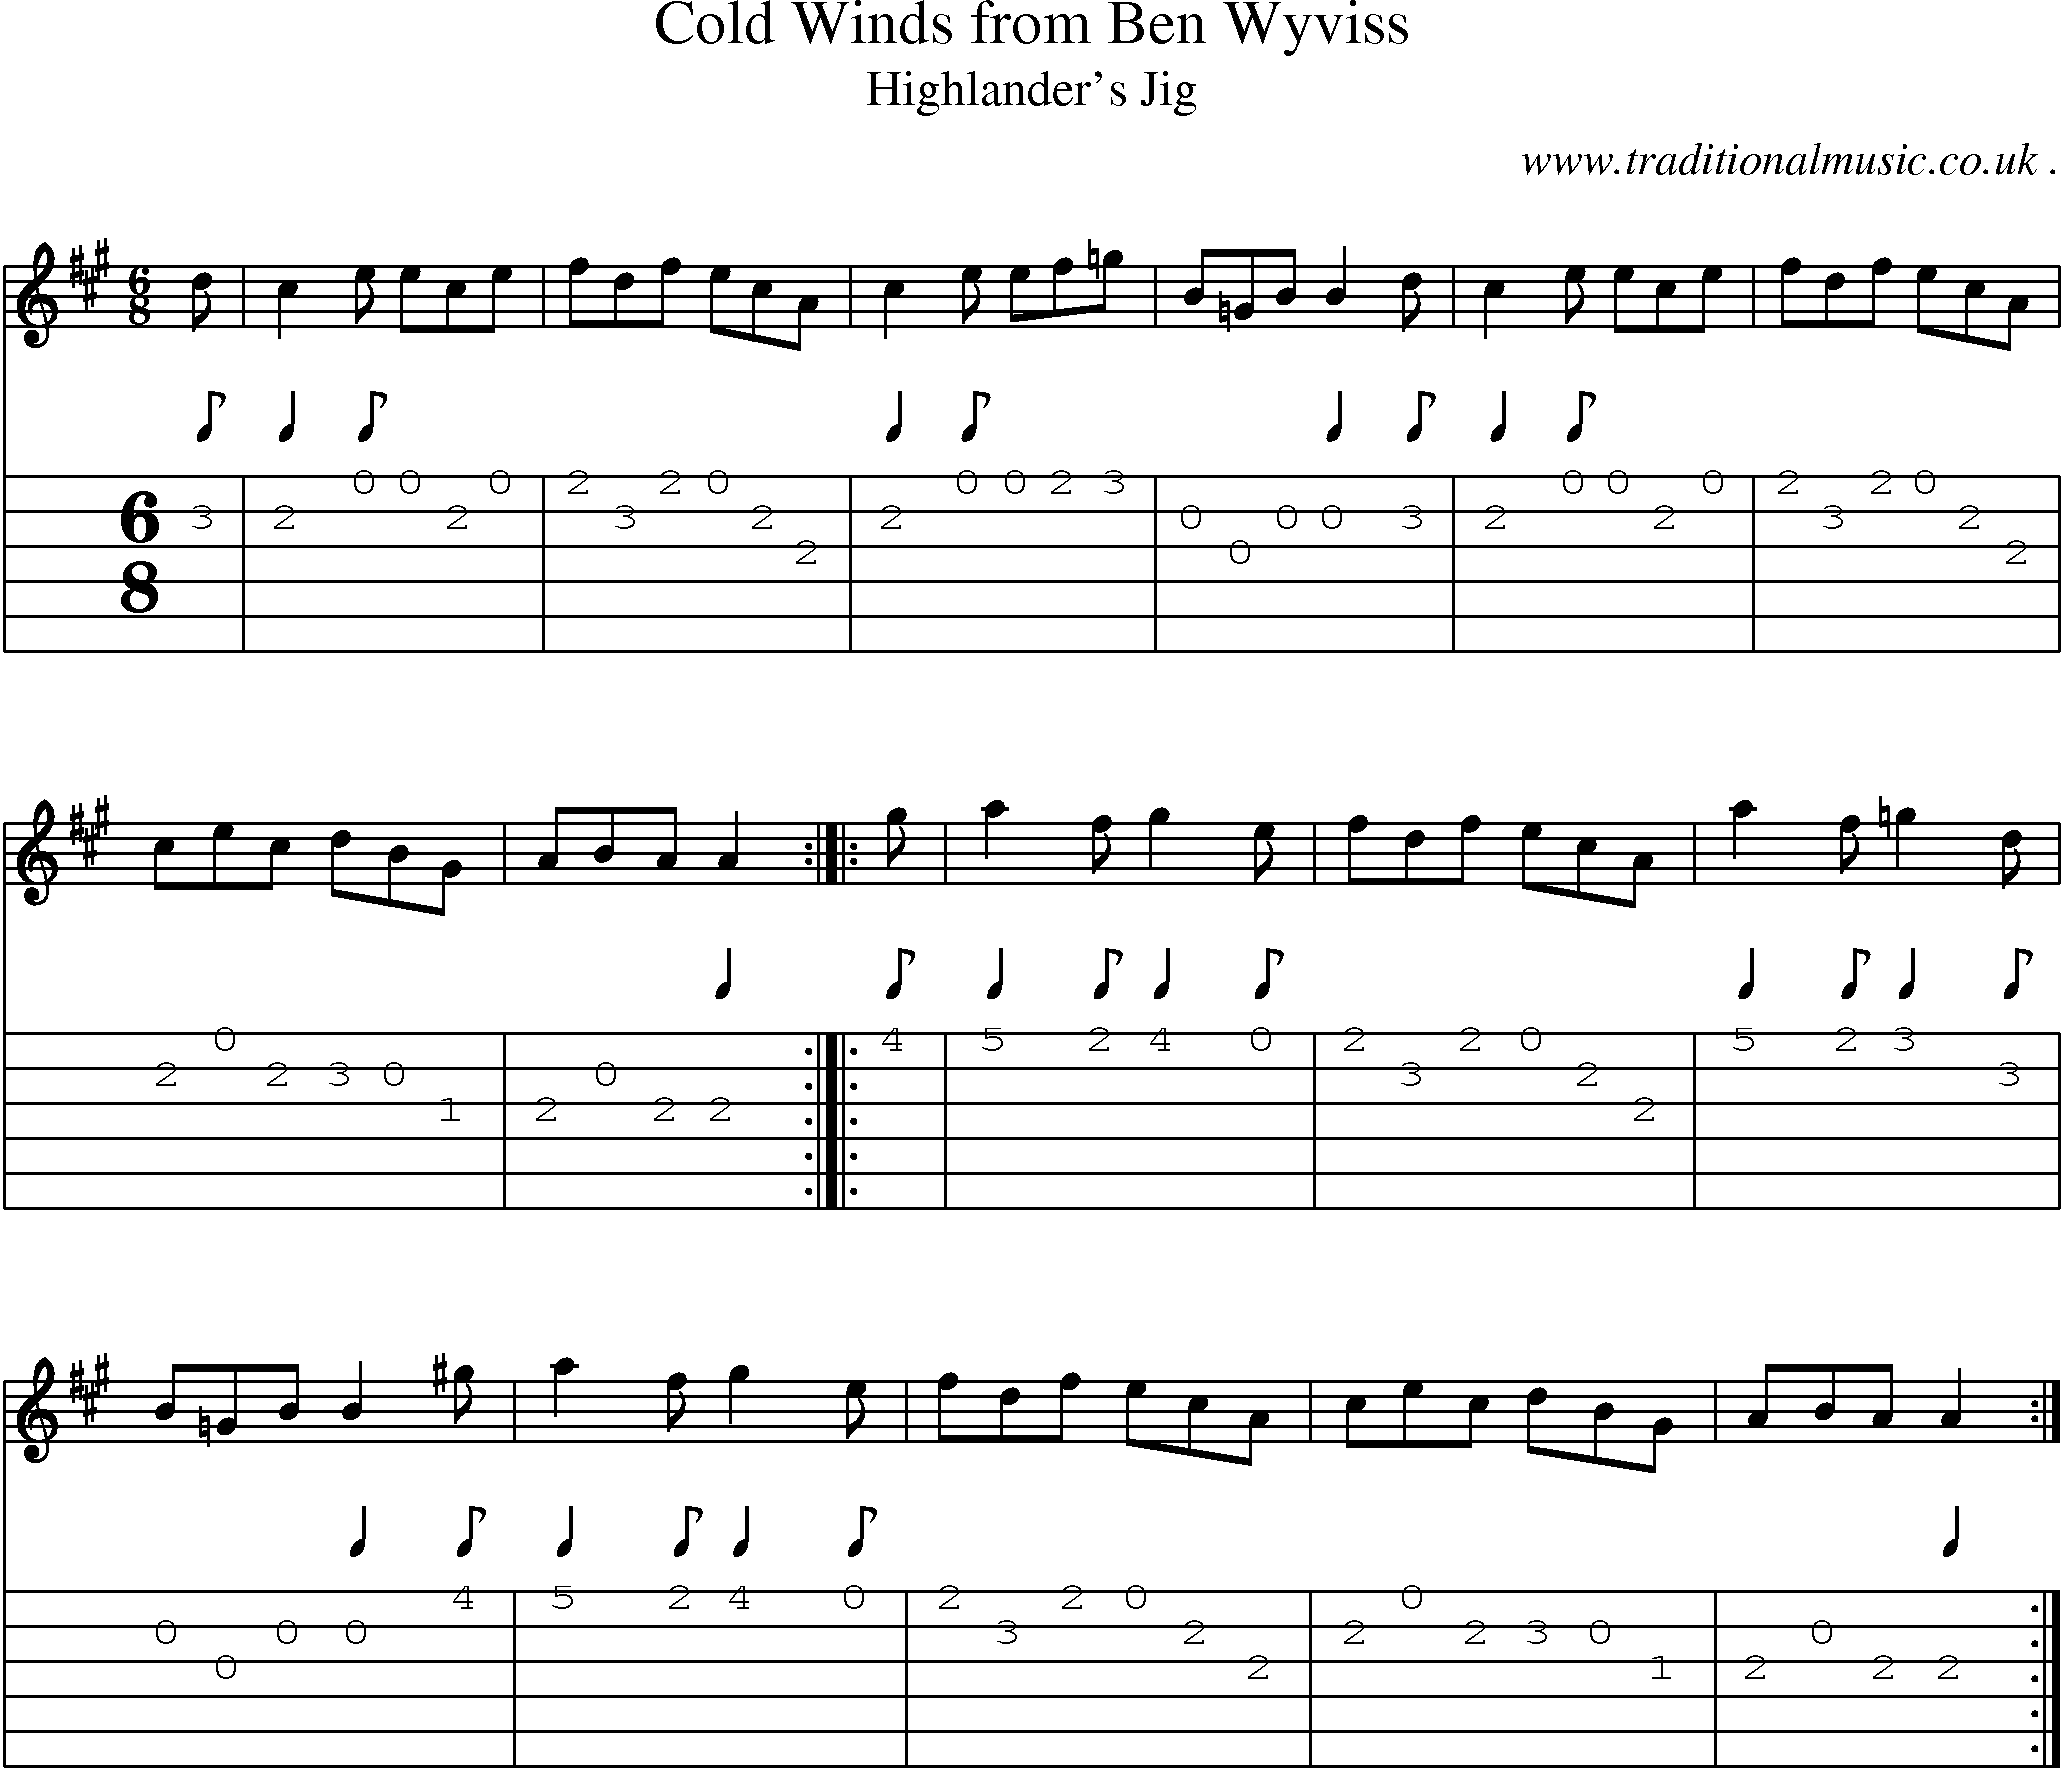 Sheet-music  score, Chords and Guitar Tabs for Cold Winds From Ben Wyviss